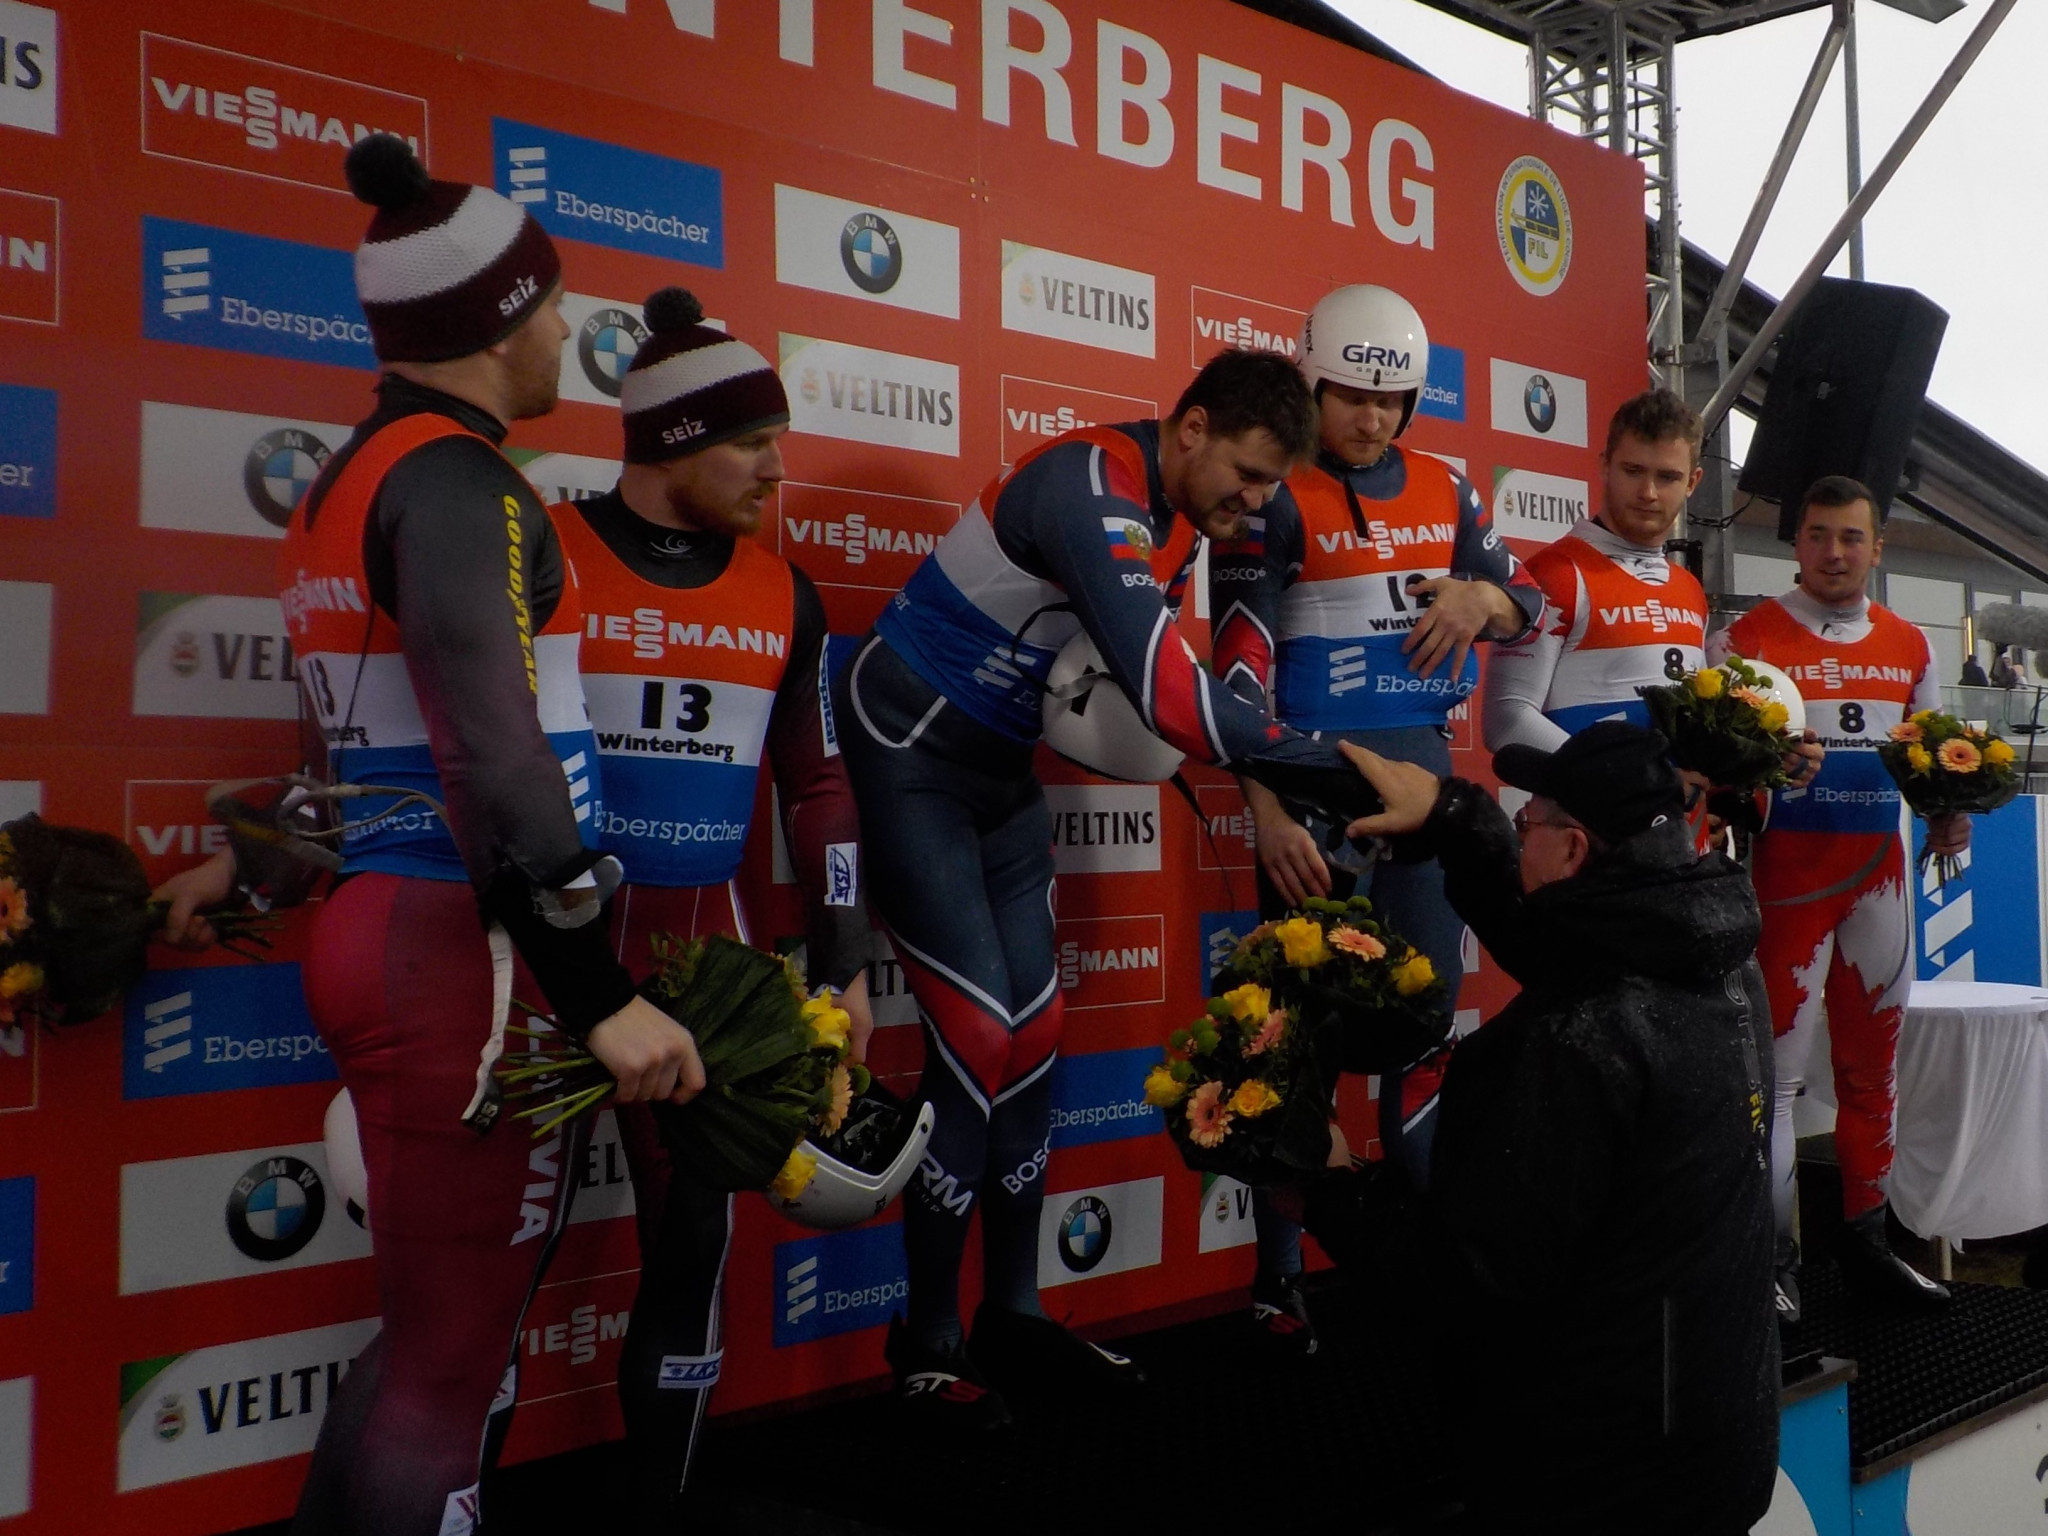 Russia won two gold medals on the final day of the Luge World Cup in Winterberg ©FIL